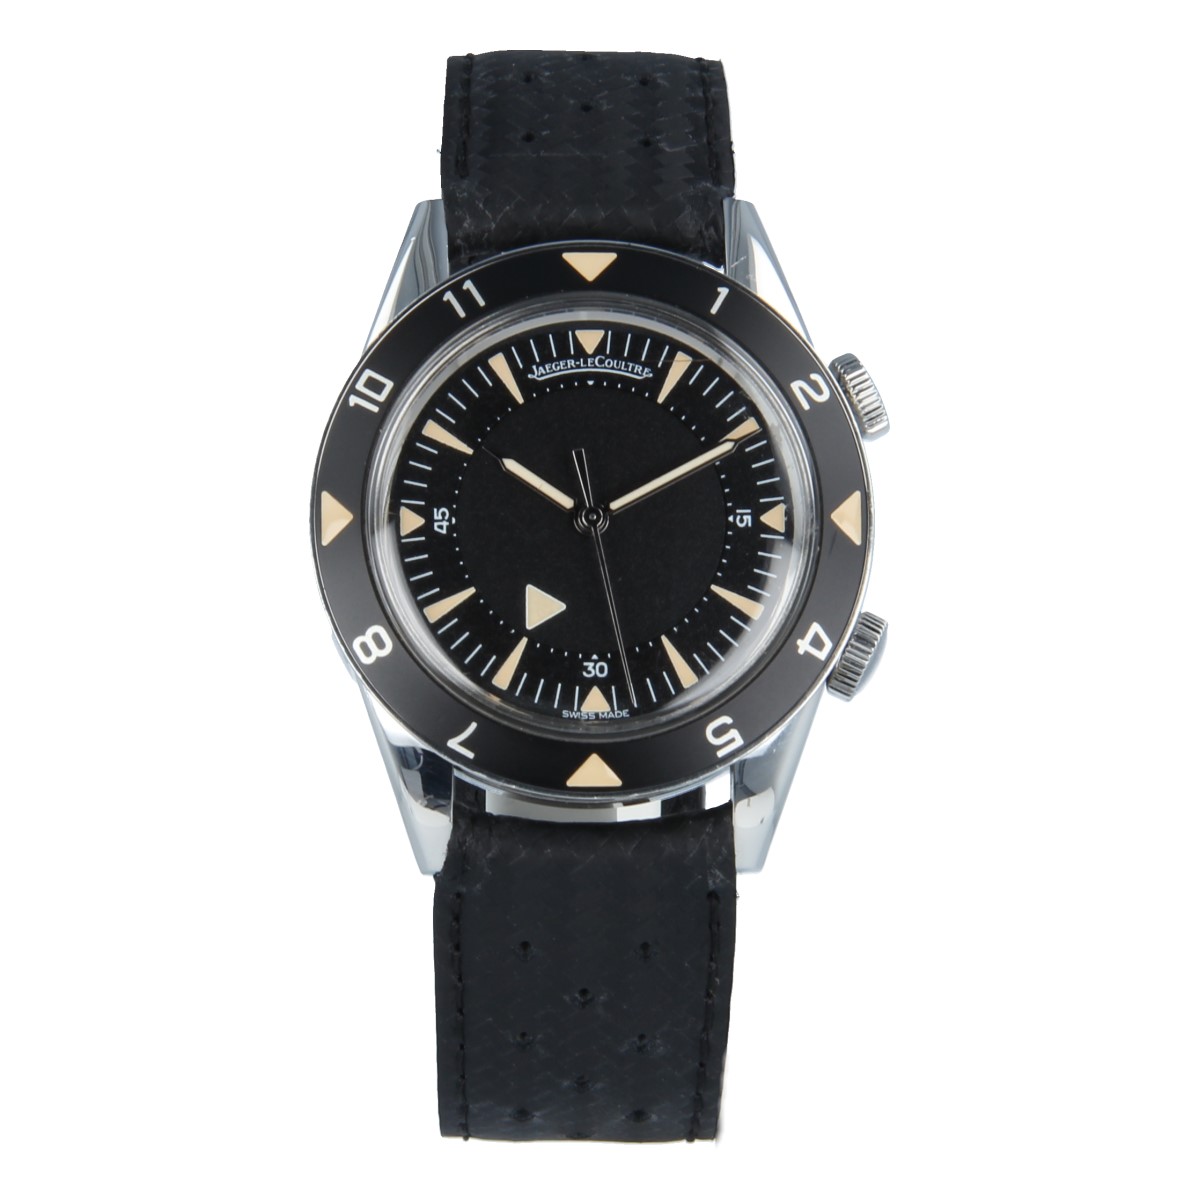 Jaeger-LeCoultre Memovox Tribute to Deep Sea | Buy pre-owned Jaeger-LeCoultre watch